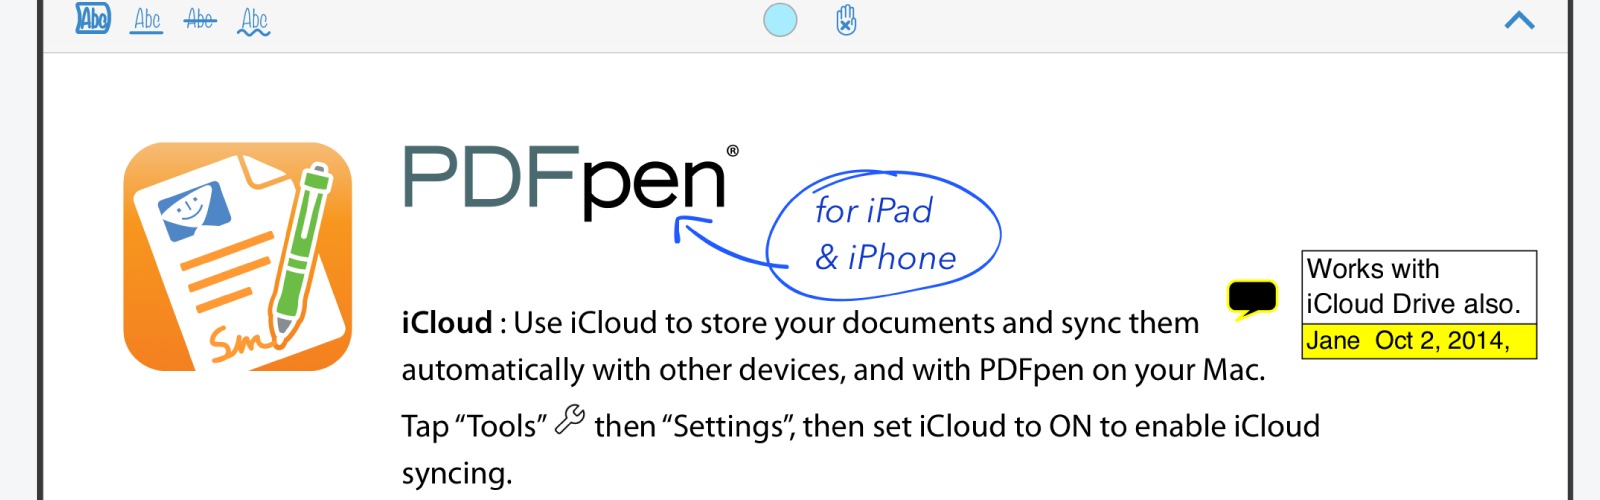 cost of pdfpen pro